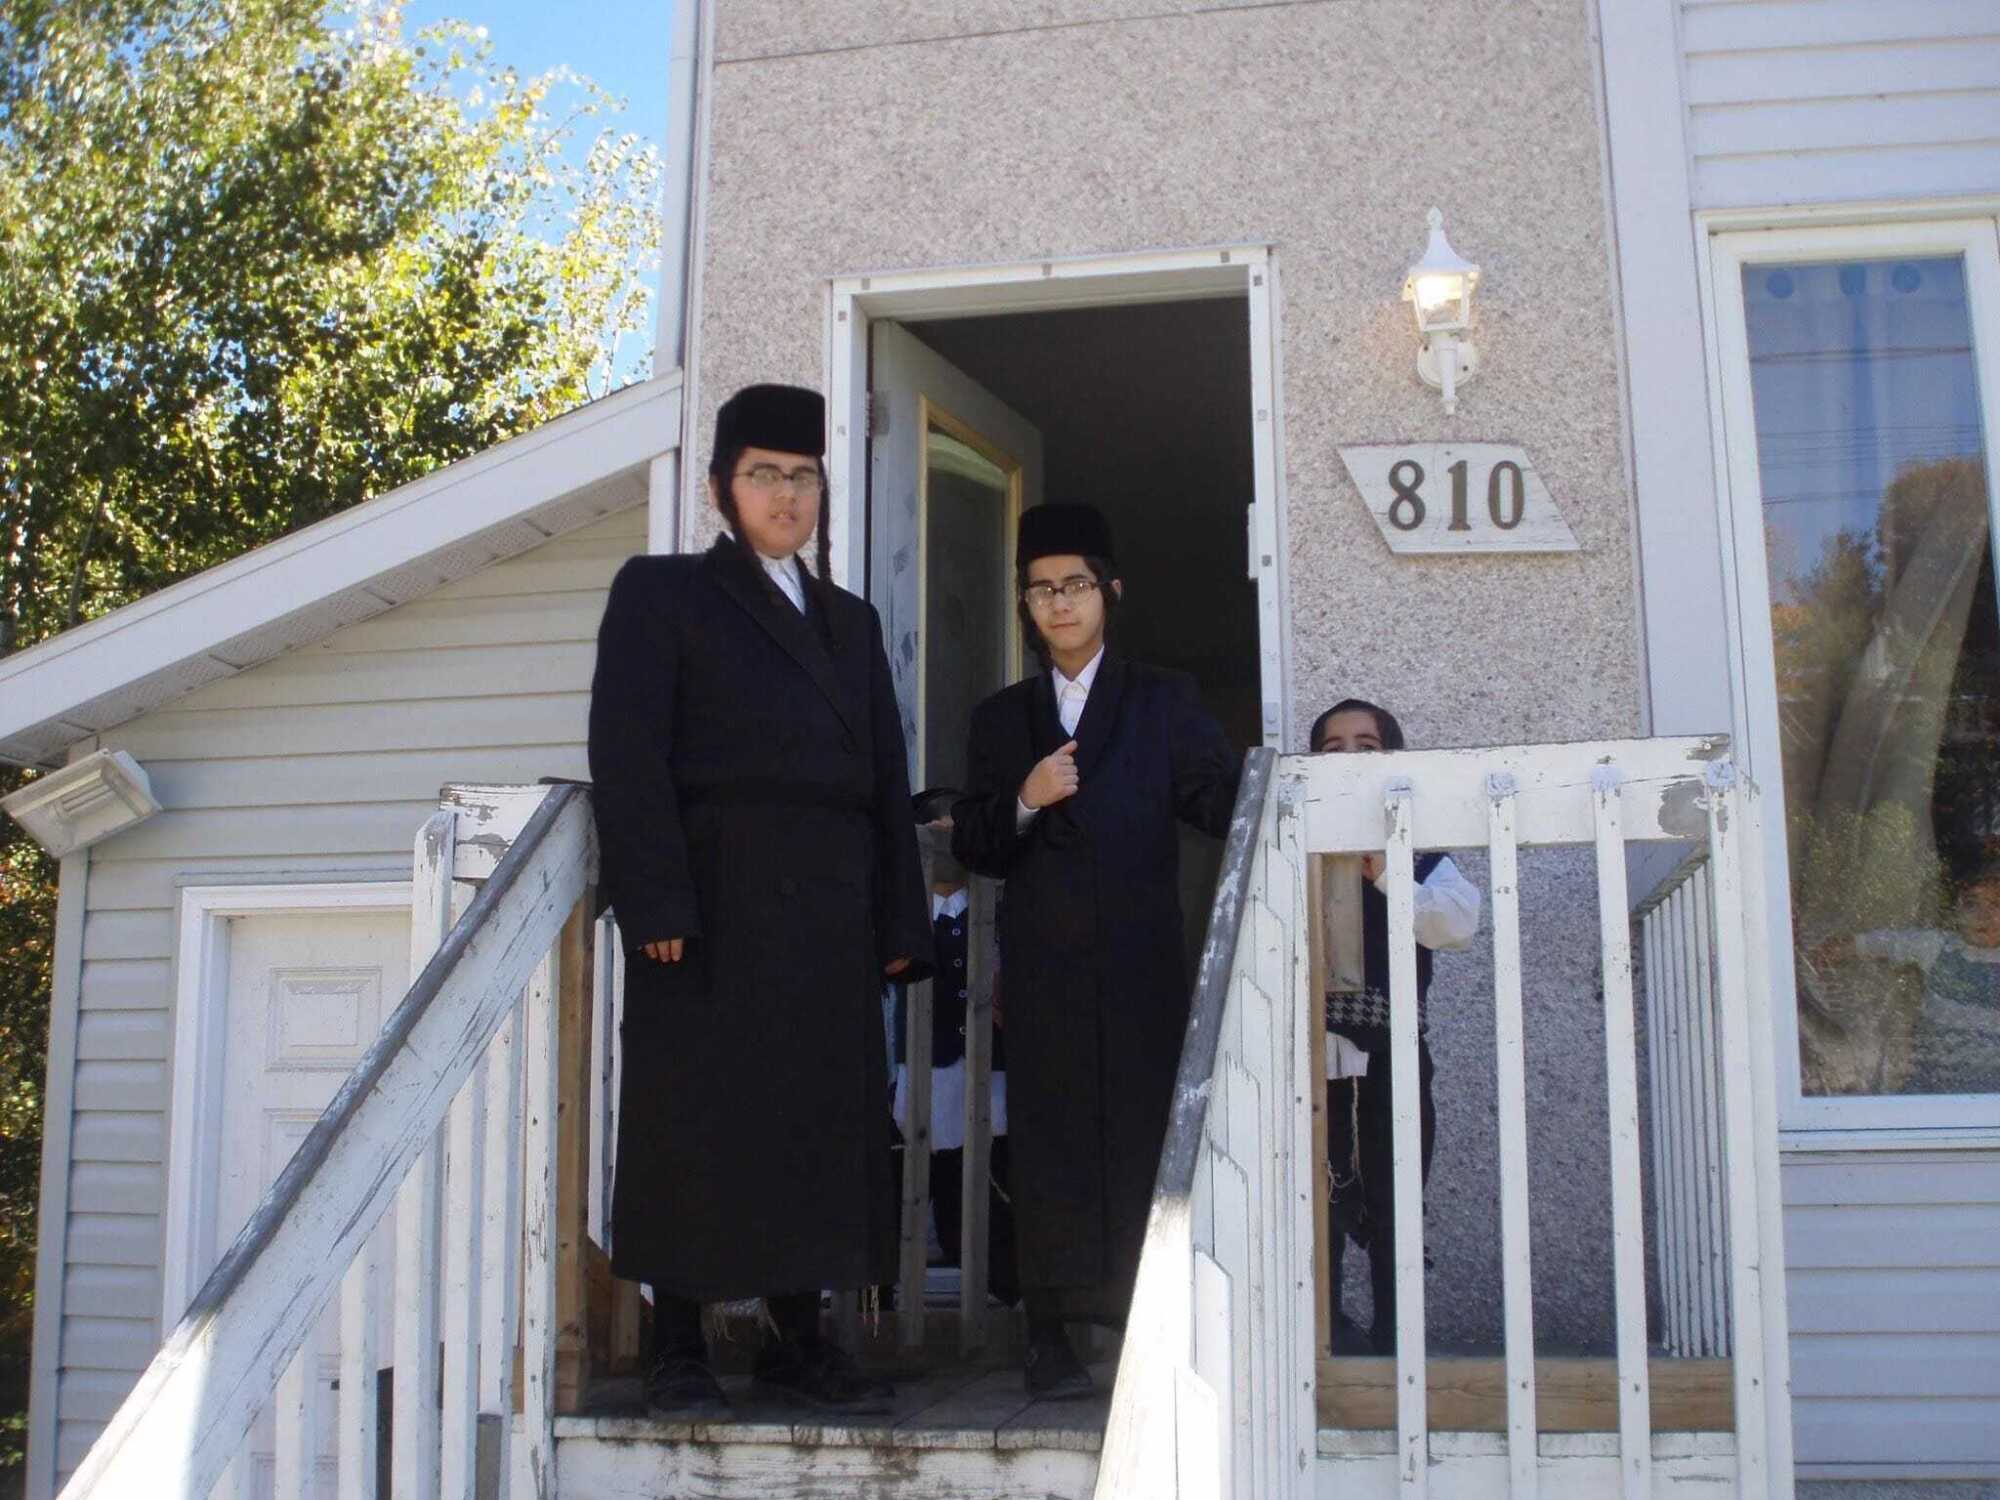 Two people with dark clothing, hats and earlocks stand near stairs outside a home 